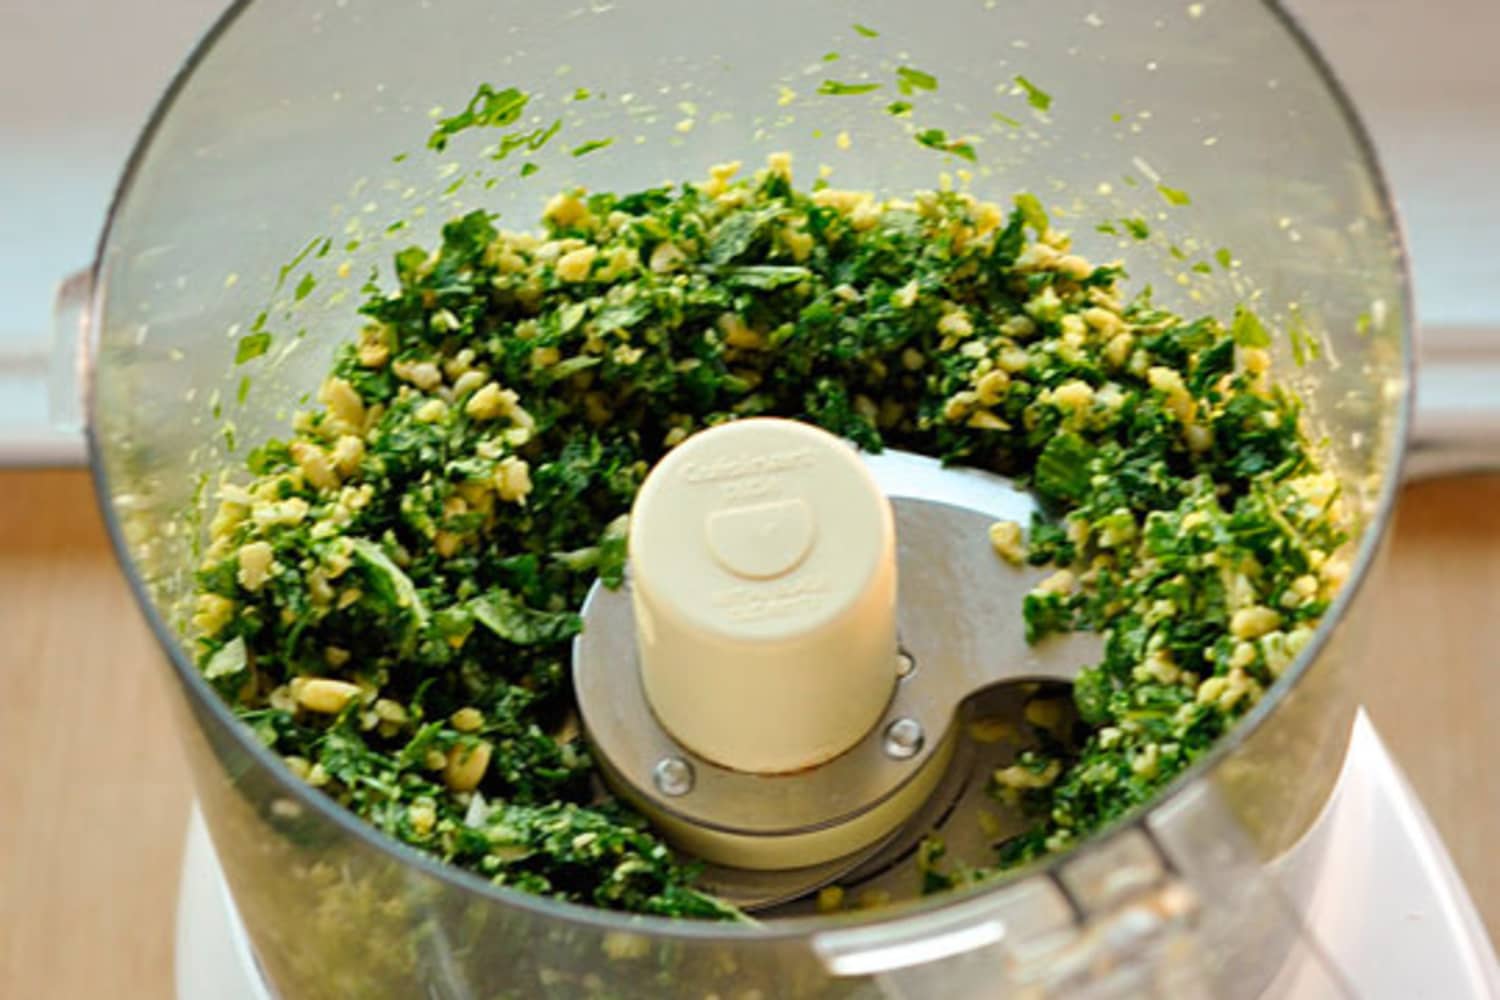 What to use instead of a food processor?